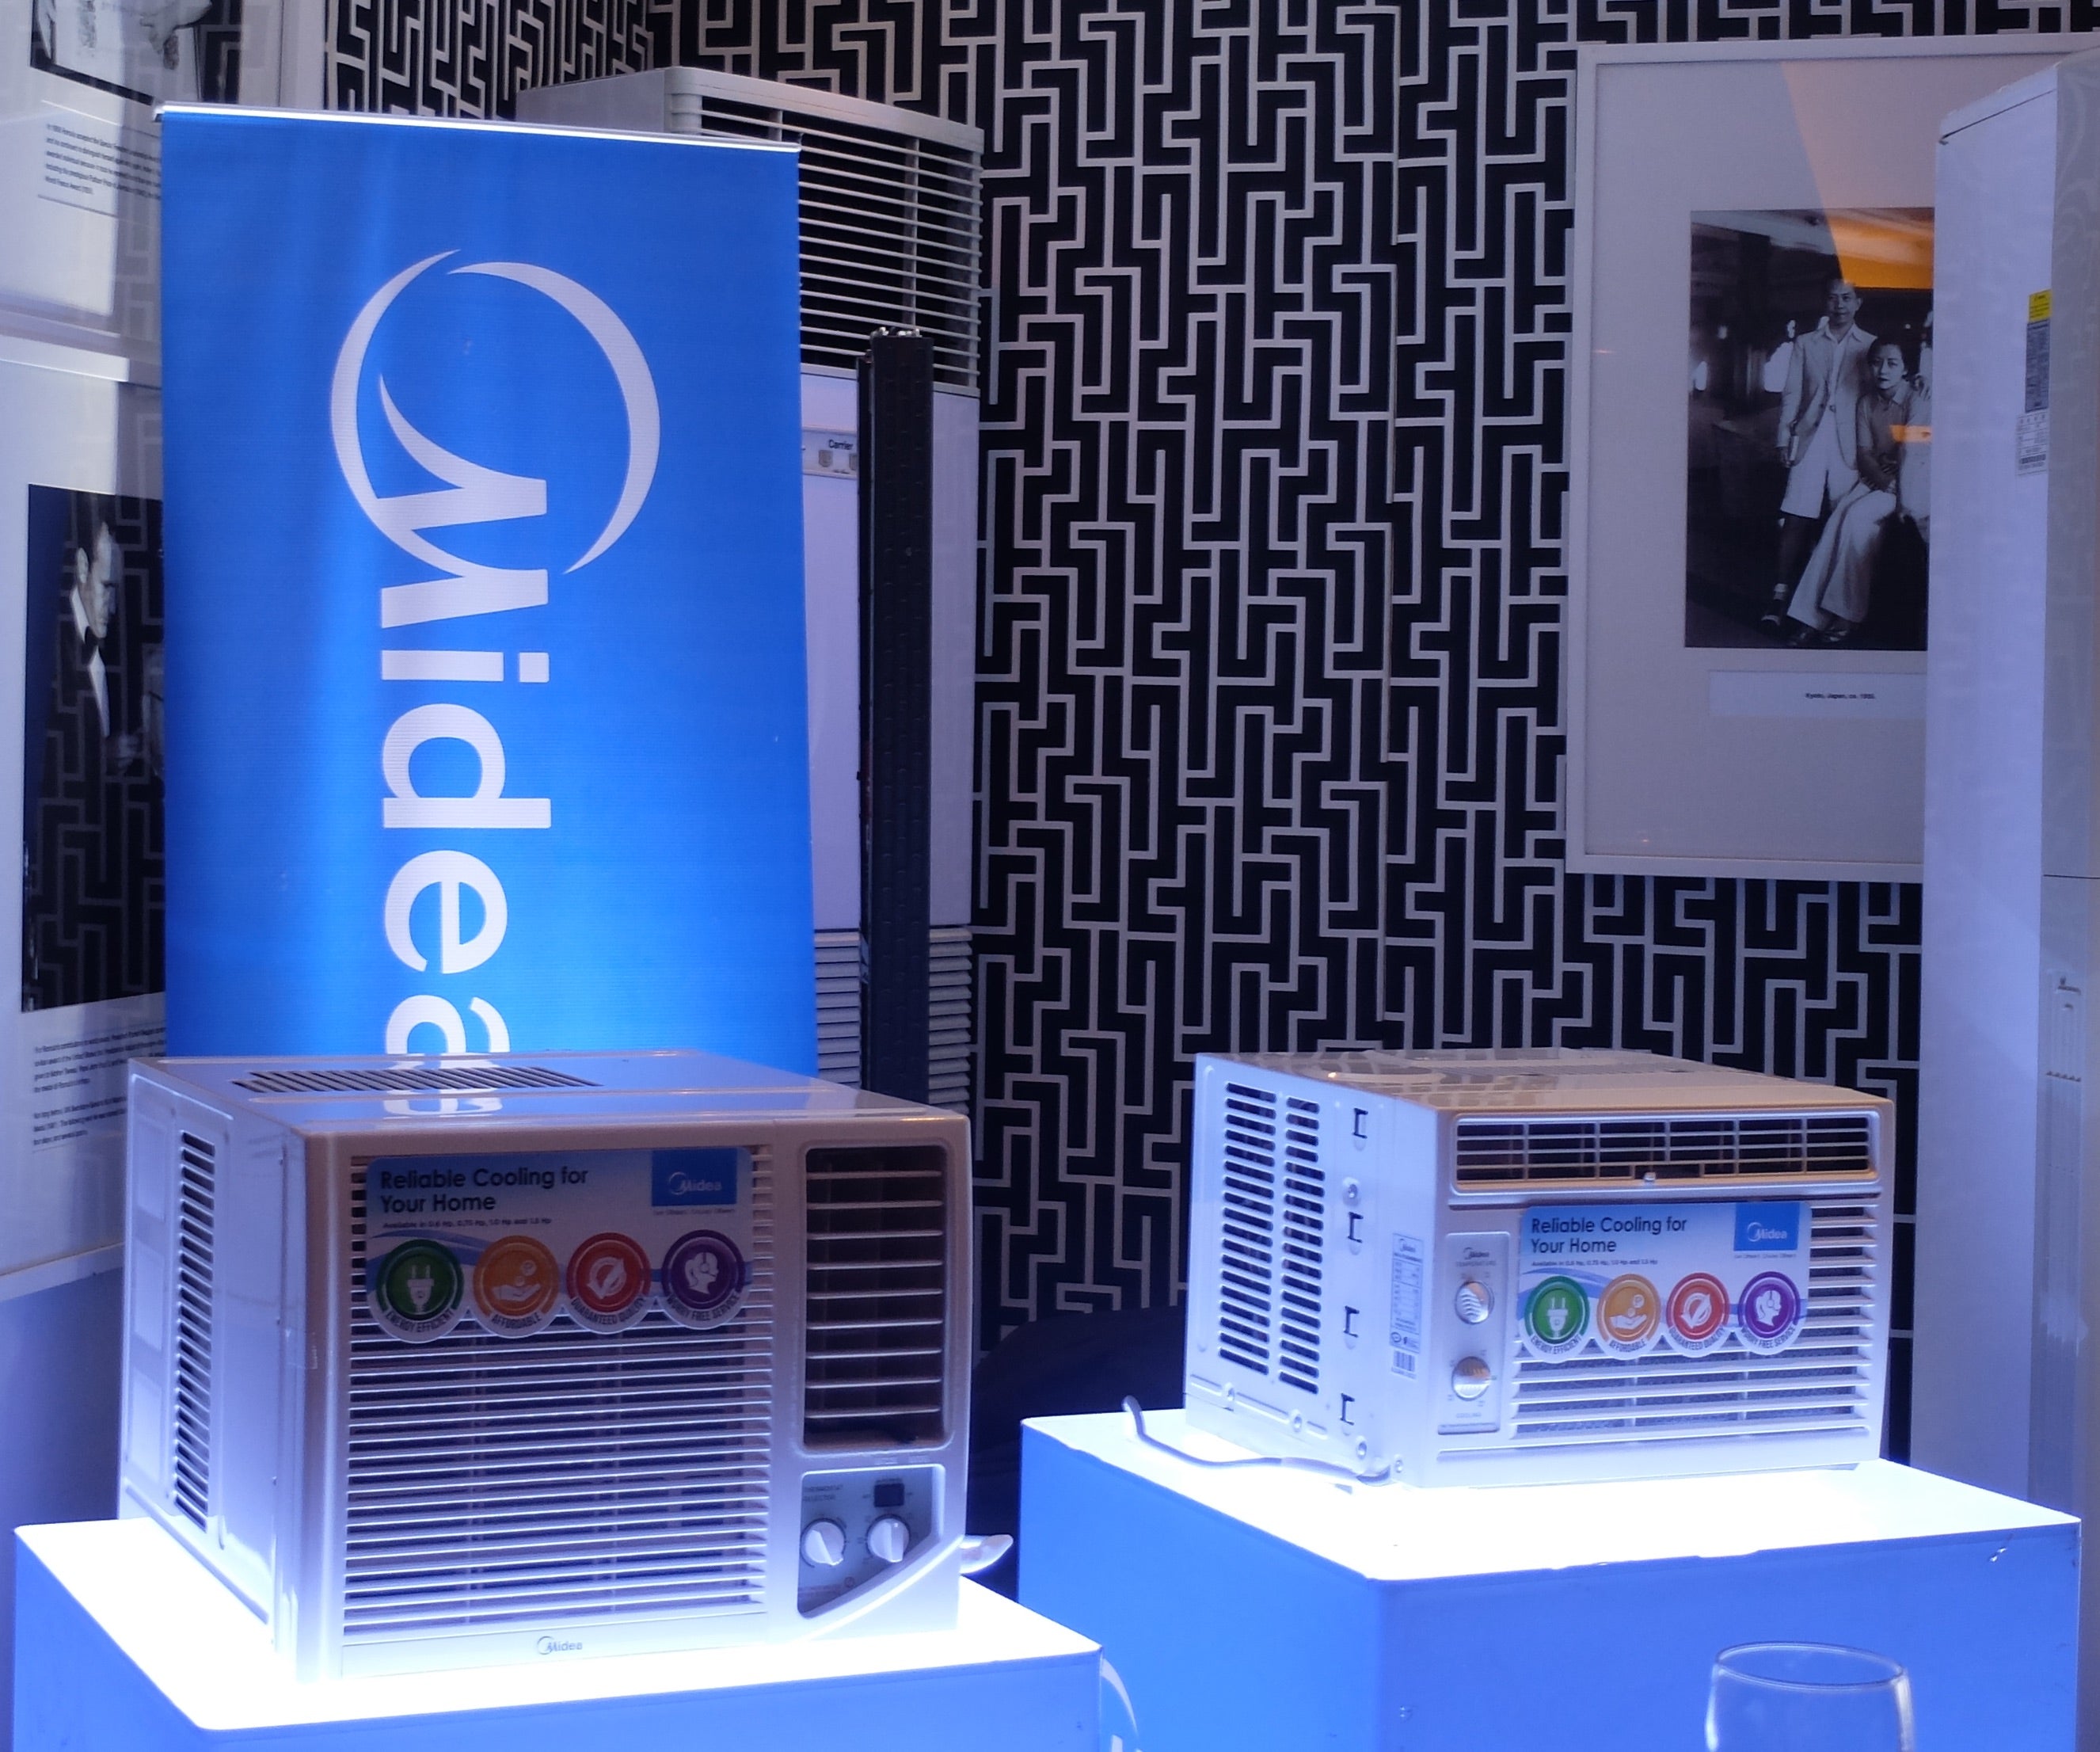 Midea unveils innovative Cooling Solutions for Homes and Businesses